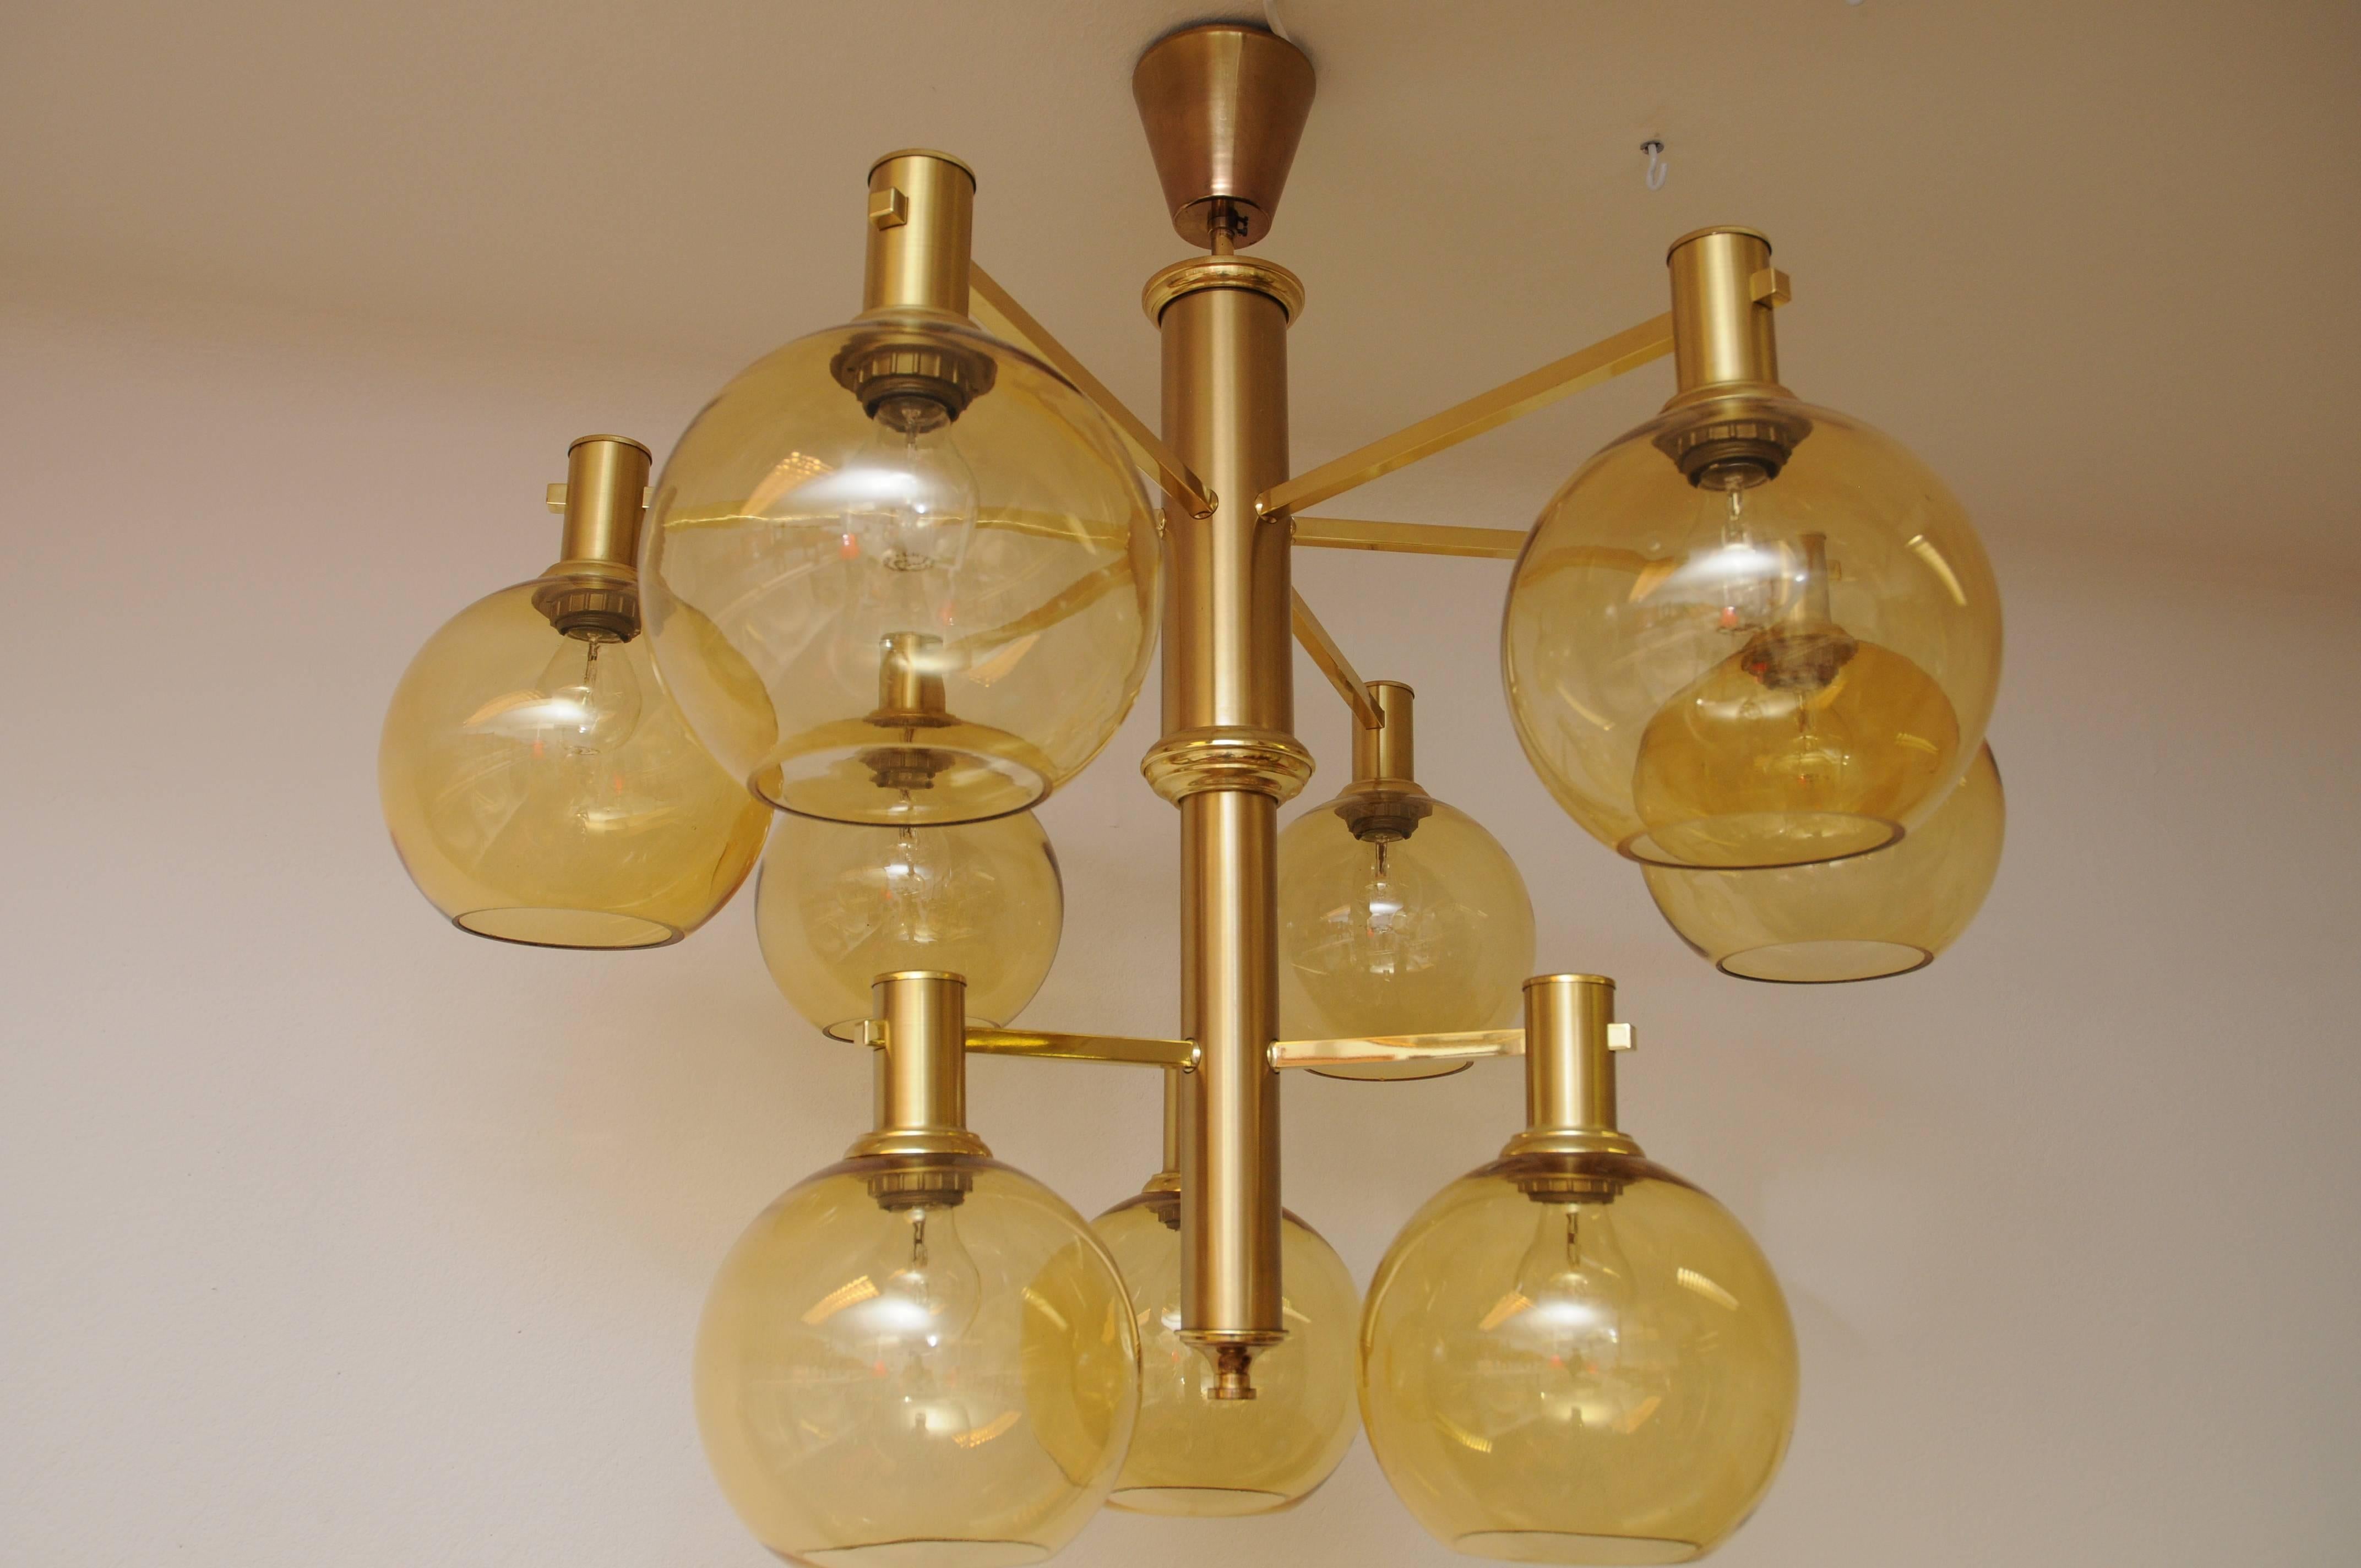 Big and massive ceiling lamp in the manner and style of Hans Agne Jakobsson. Brass pole and glass shades of  nine beautiful glass domes with golden shimmer on two separate floors. Probably produced in Sweden, circa 1960s. Beautiful in a livingroom